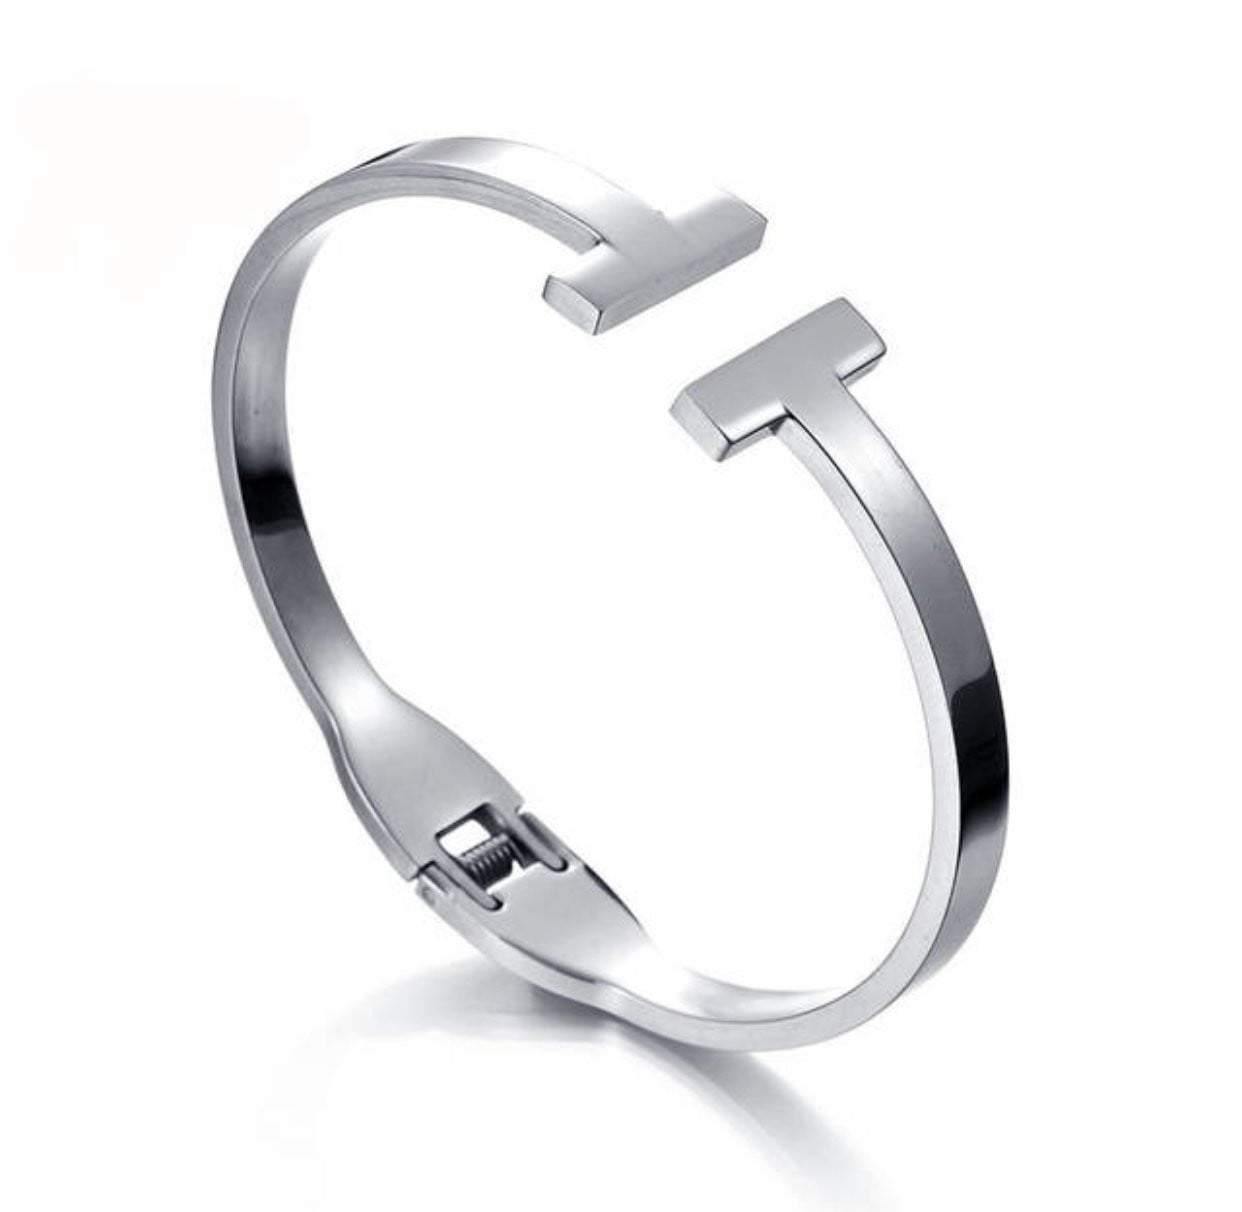 Women's T Bracelet with Double T Cuff: Stylish and Adjustable Bangle